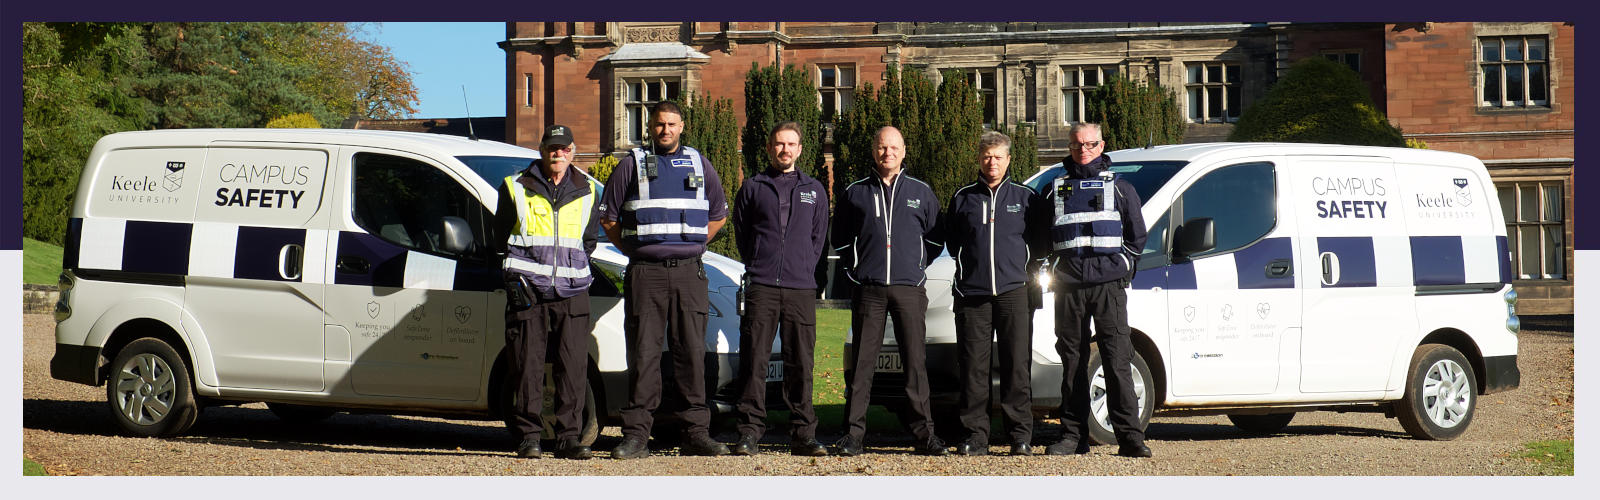 Campus safety team posing in front of Keele Hall